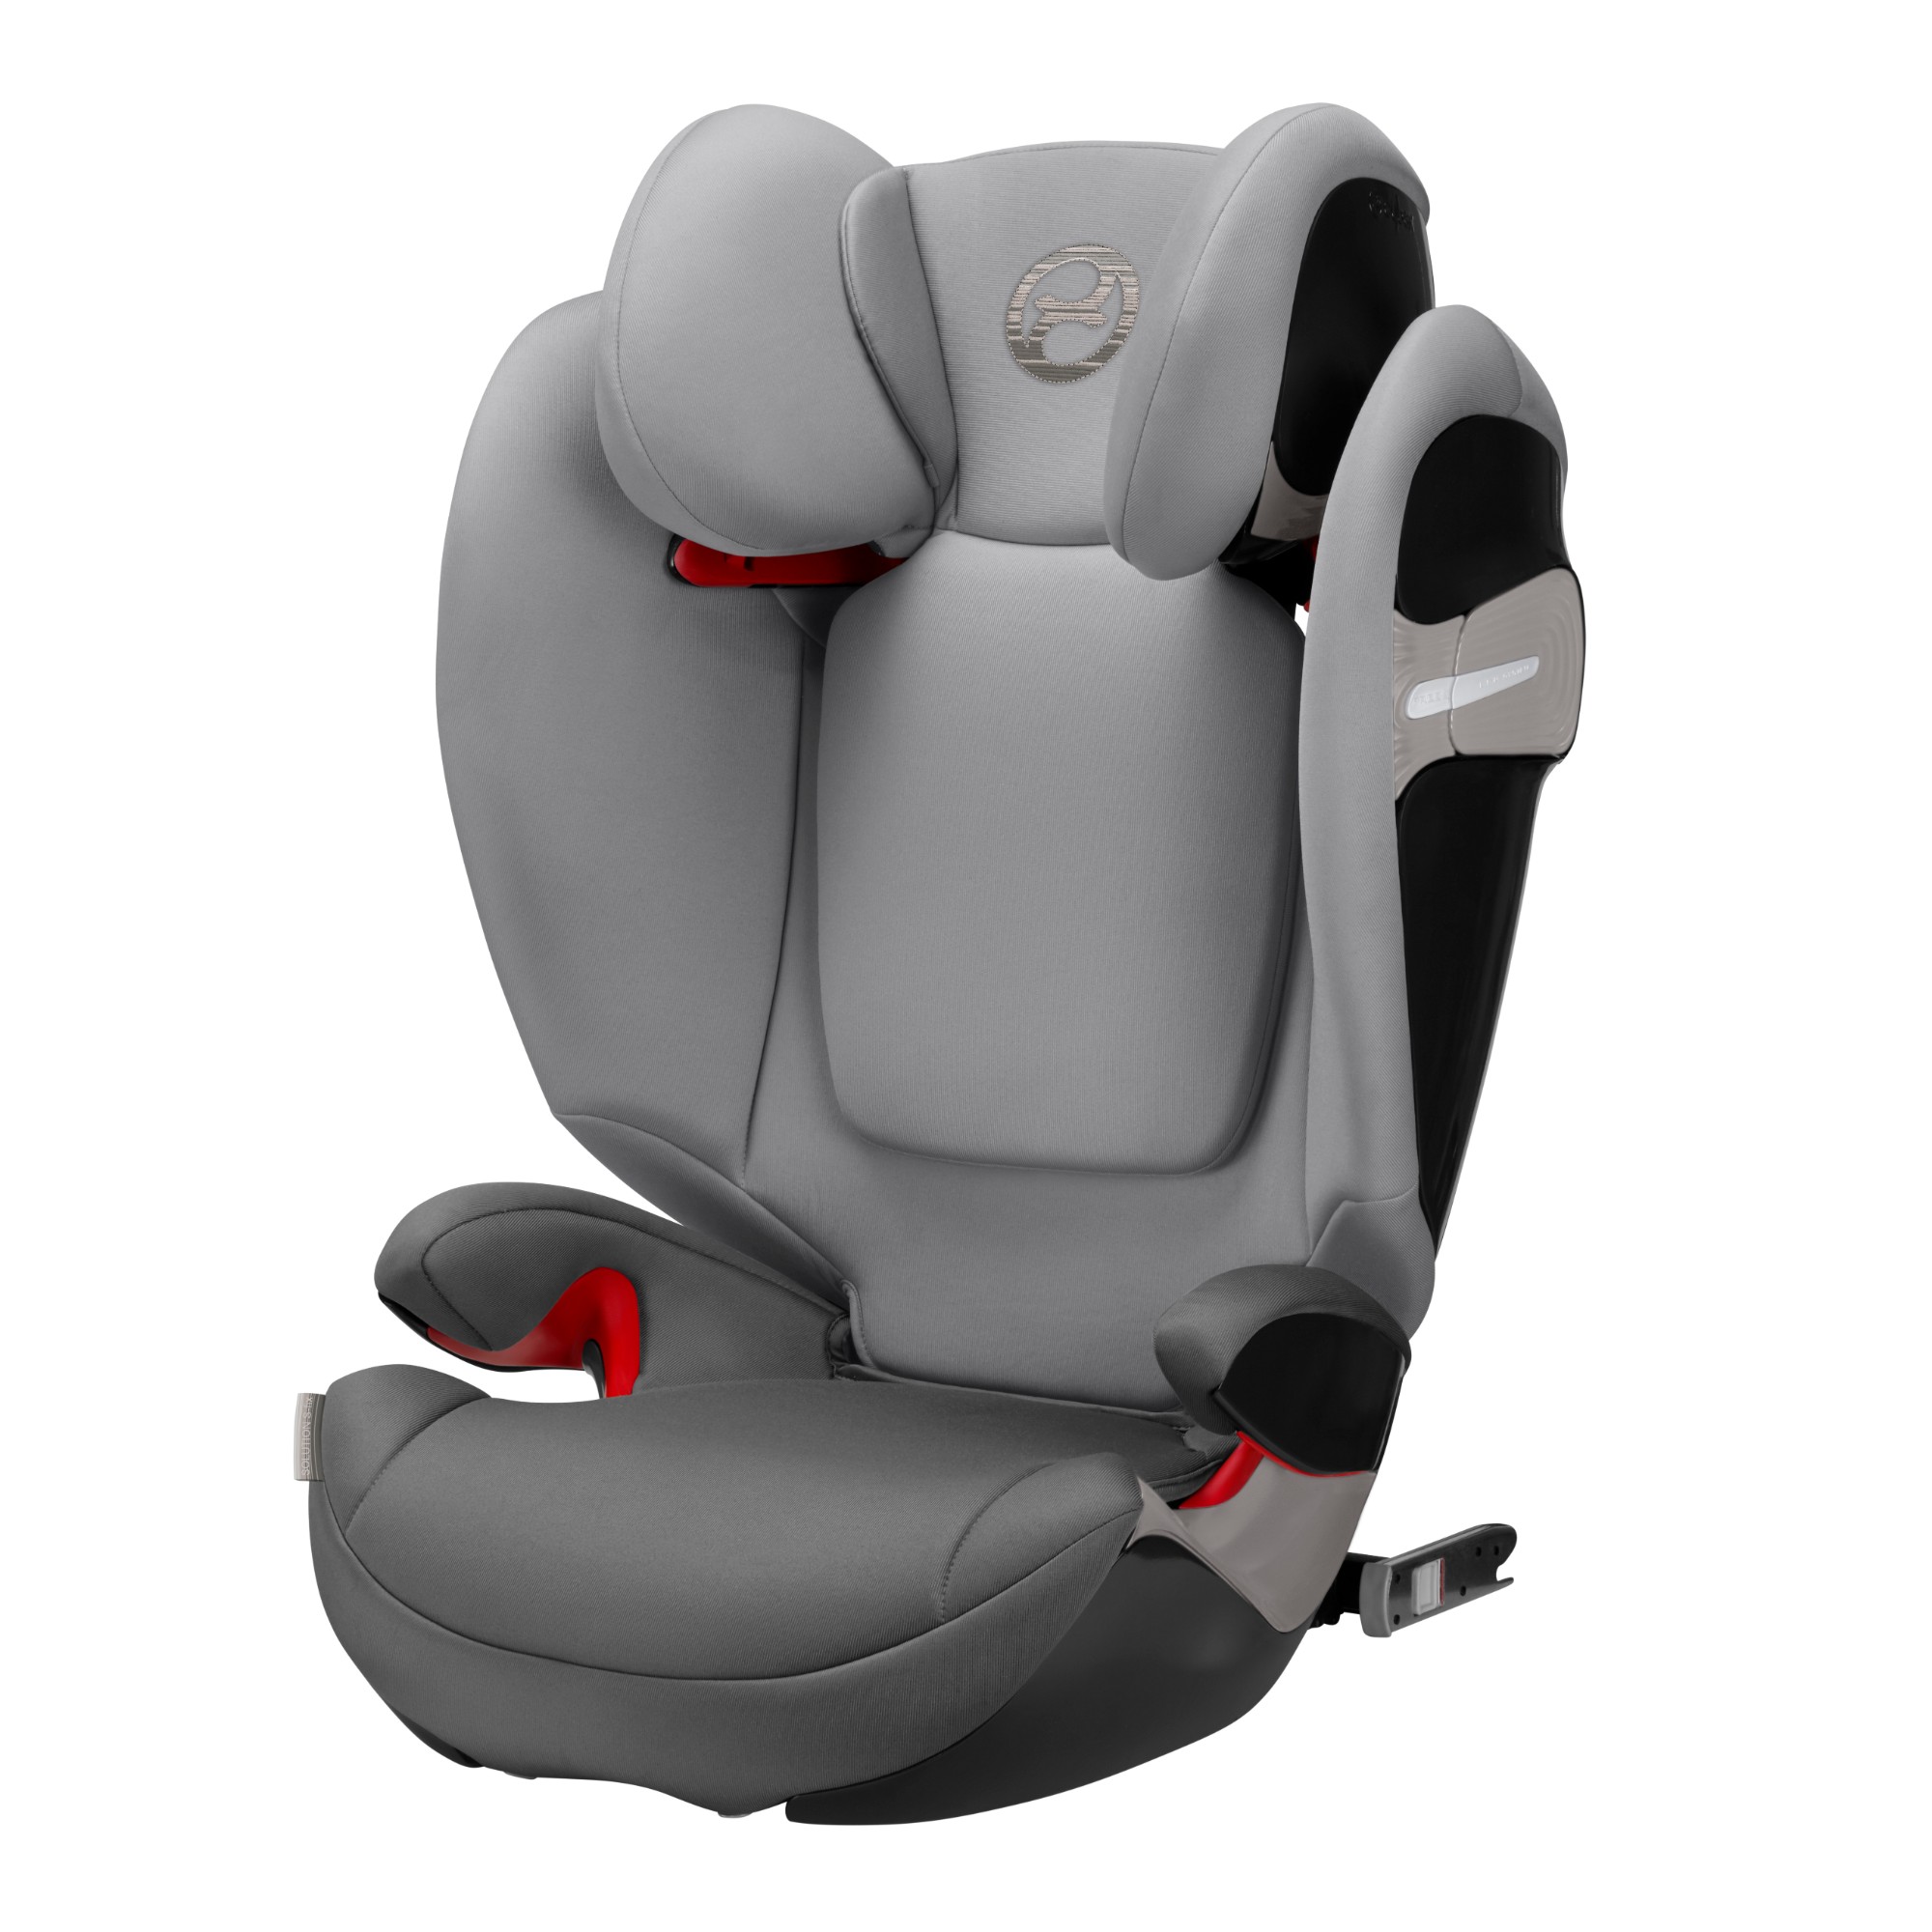 Cybex Solution S-Fix Group 2/3 Child Car Seat, Suitable from 4-12Y/36kg